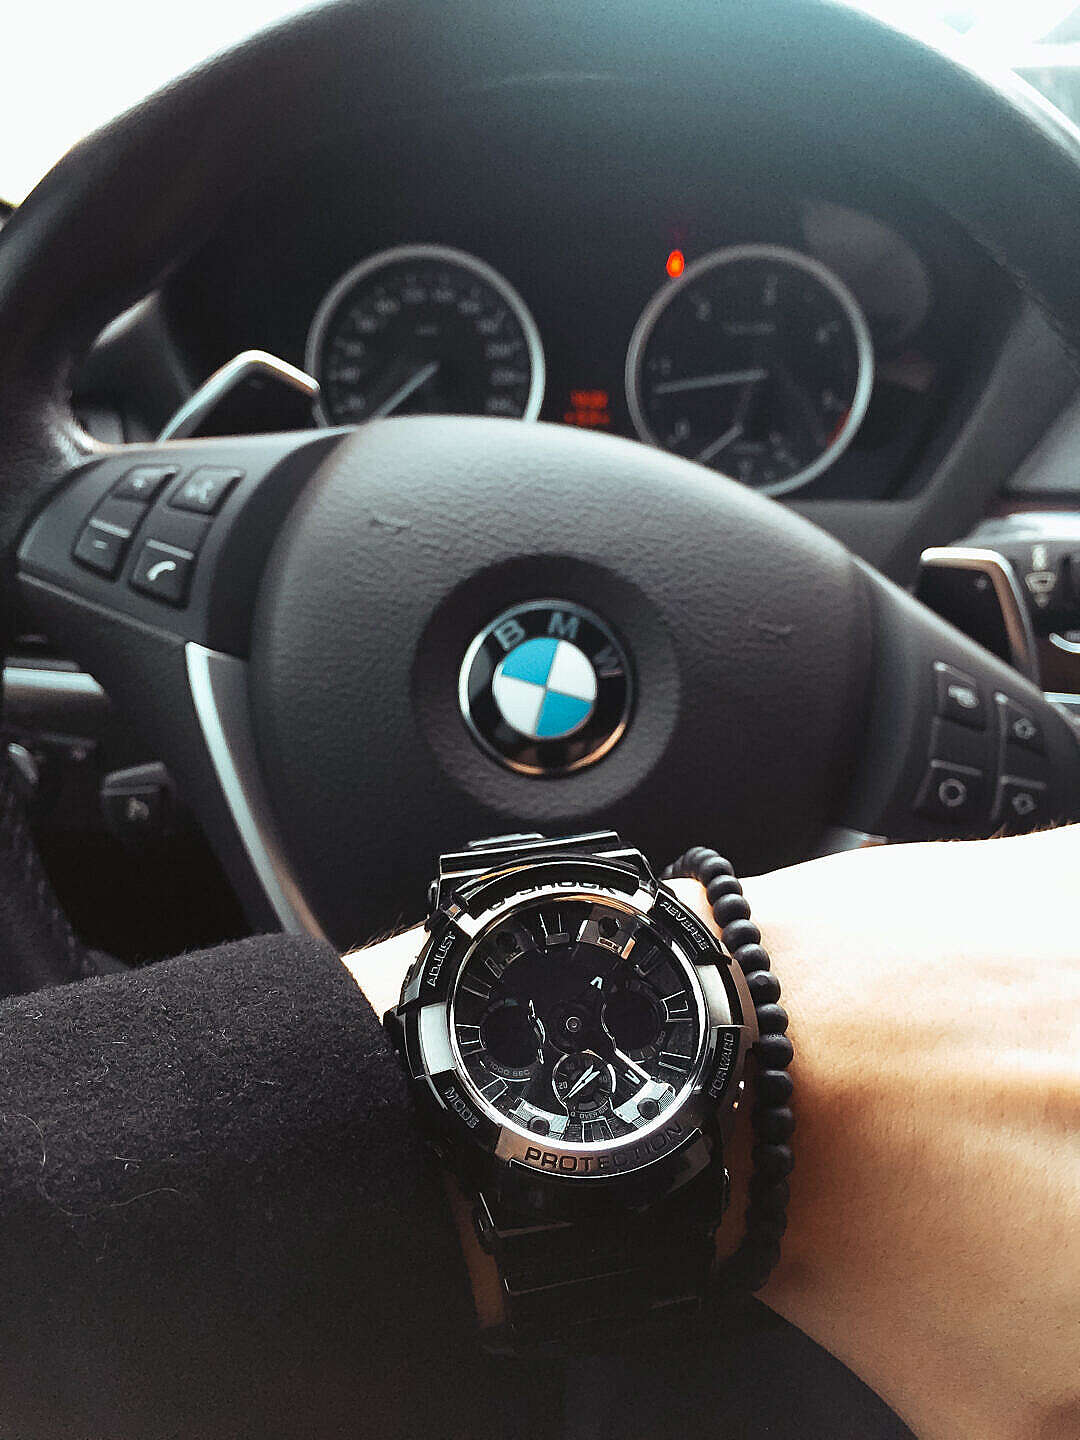 Download Watches and Steering Wheel Lifestyle FREE Stock Photo